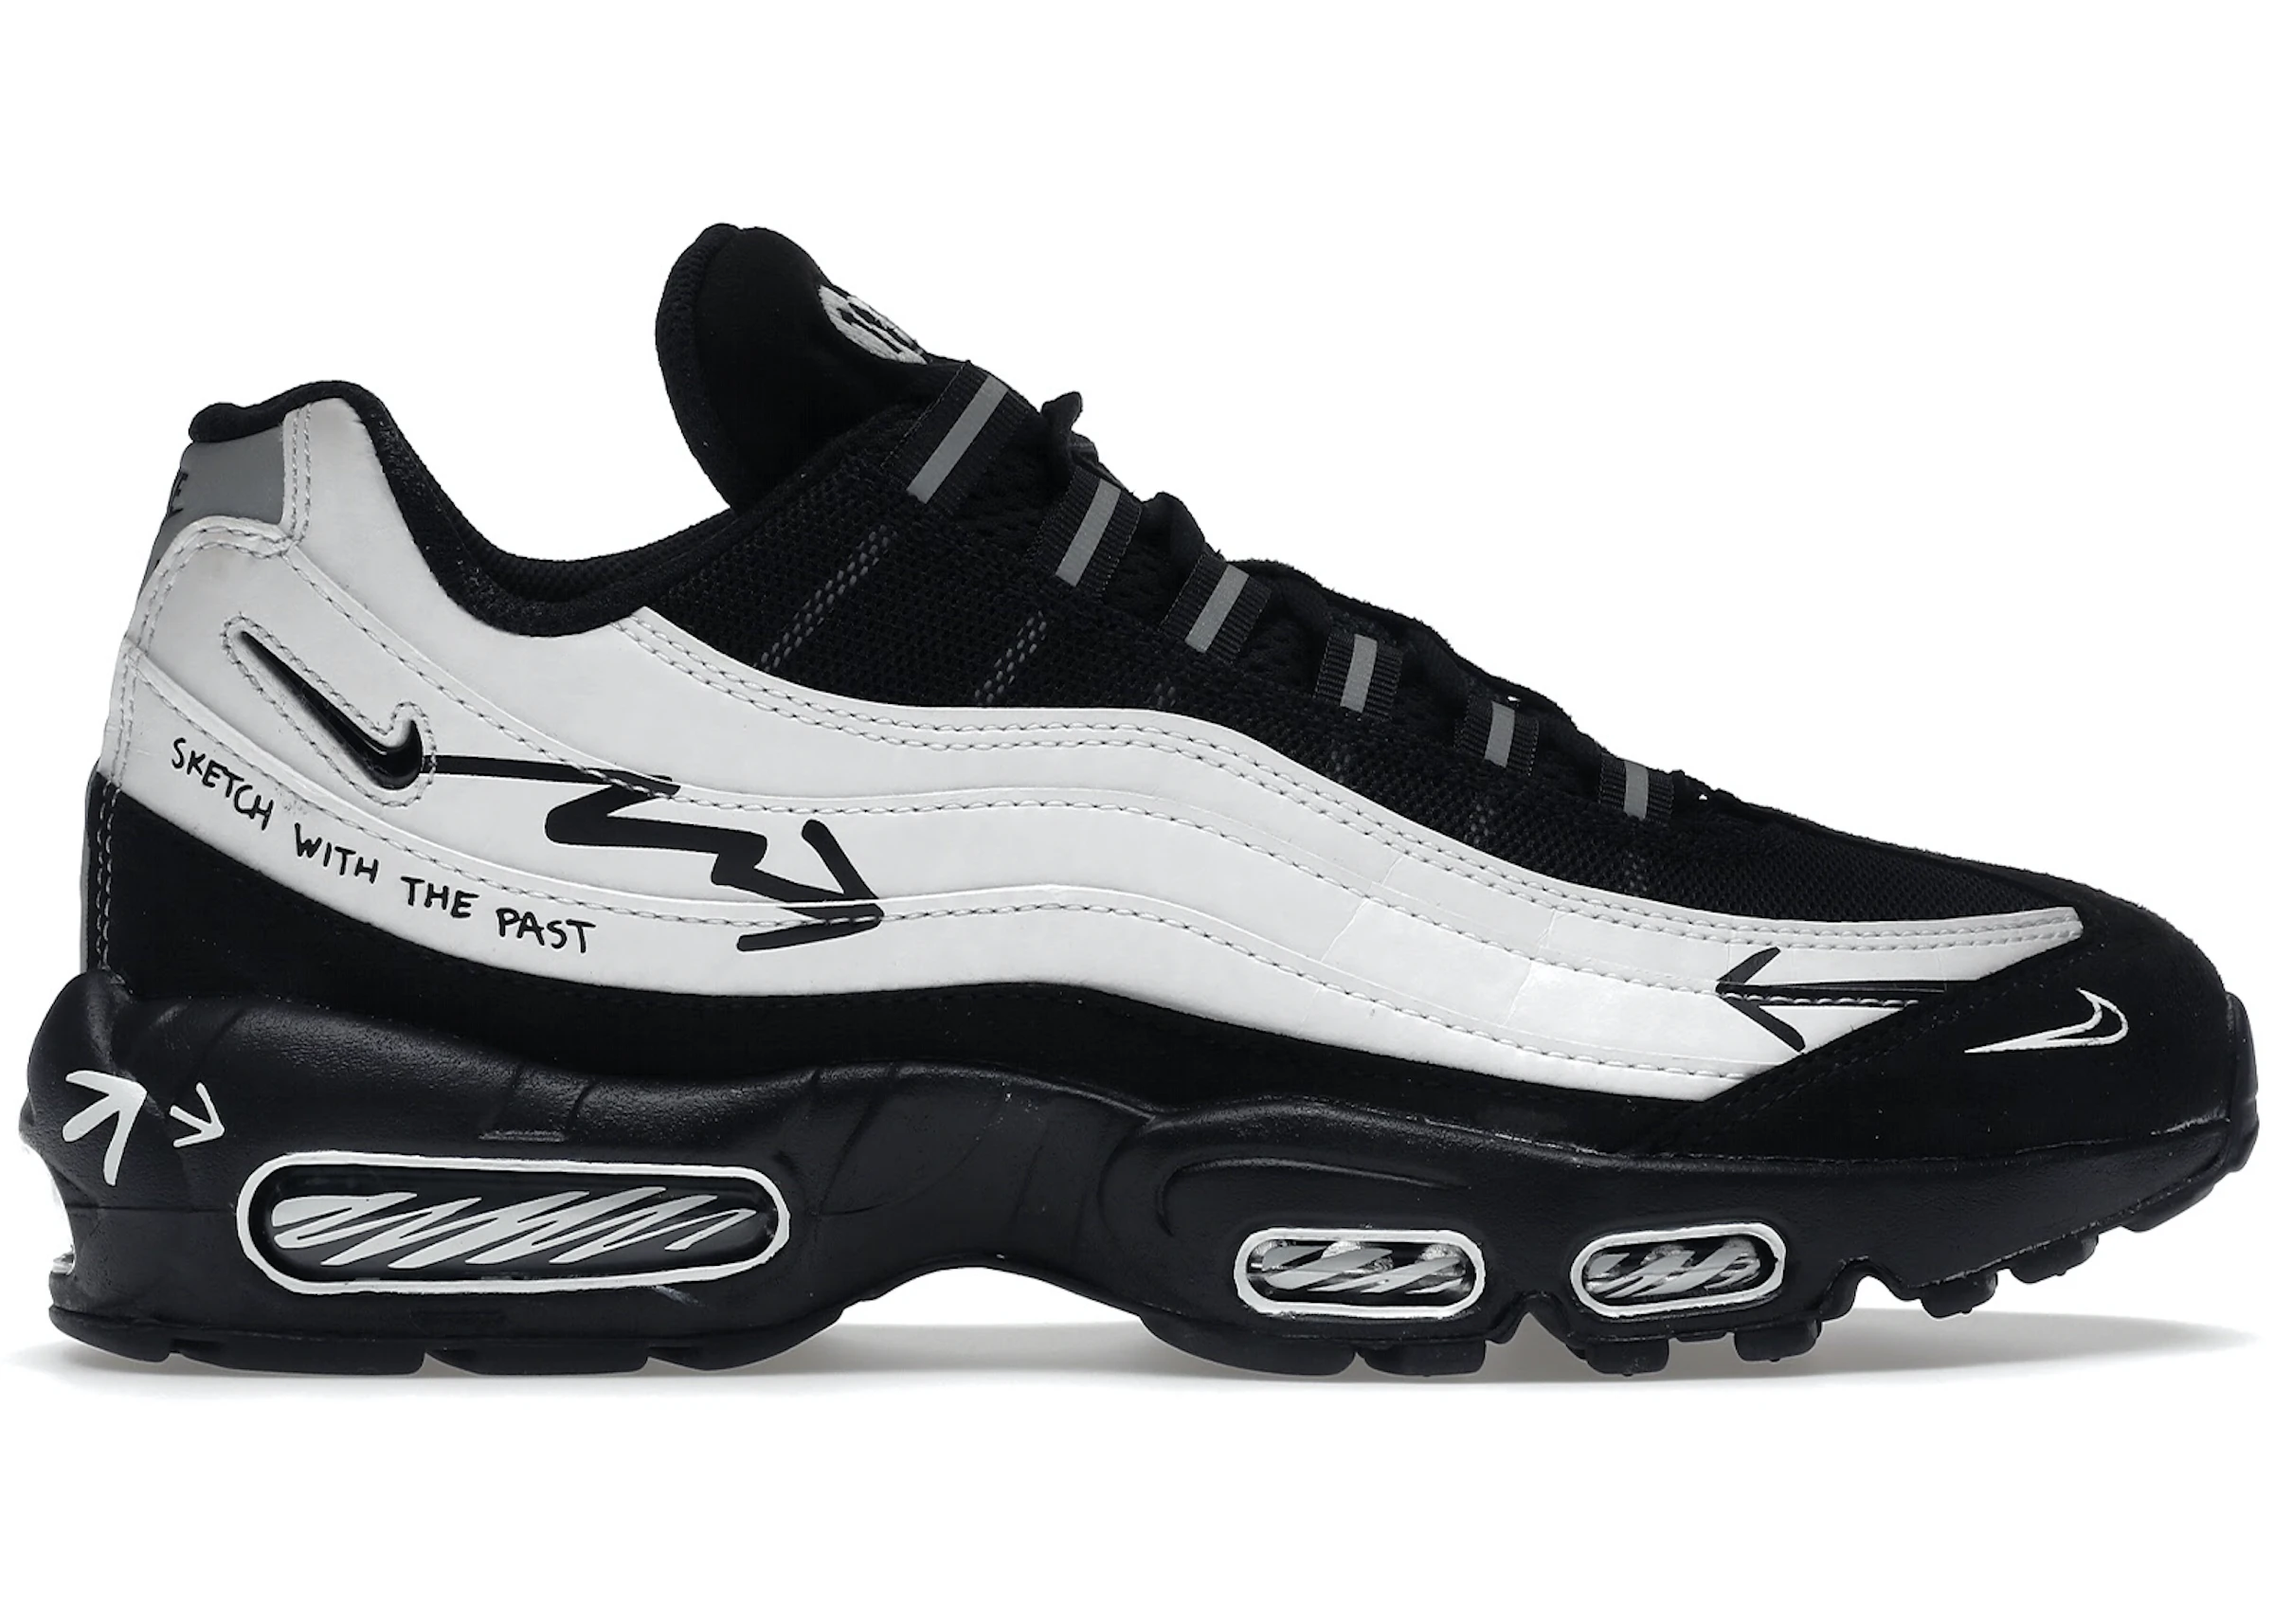 crime Bishop teenager Nike Air Max 95 SP Future Movement Sketch With The Past - DX4615-100 - US